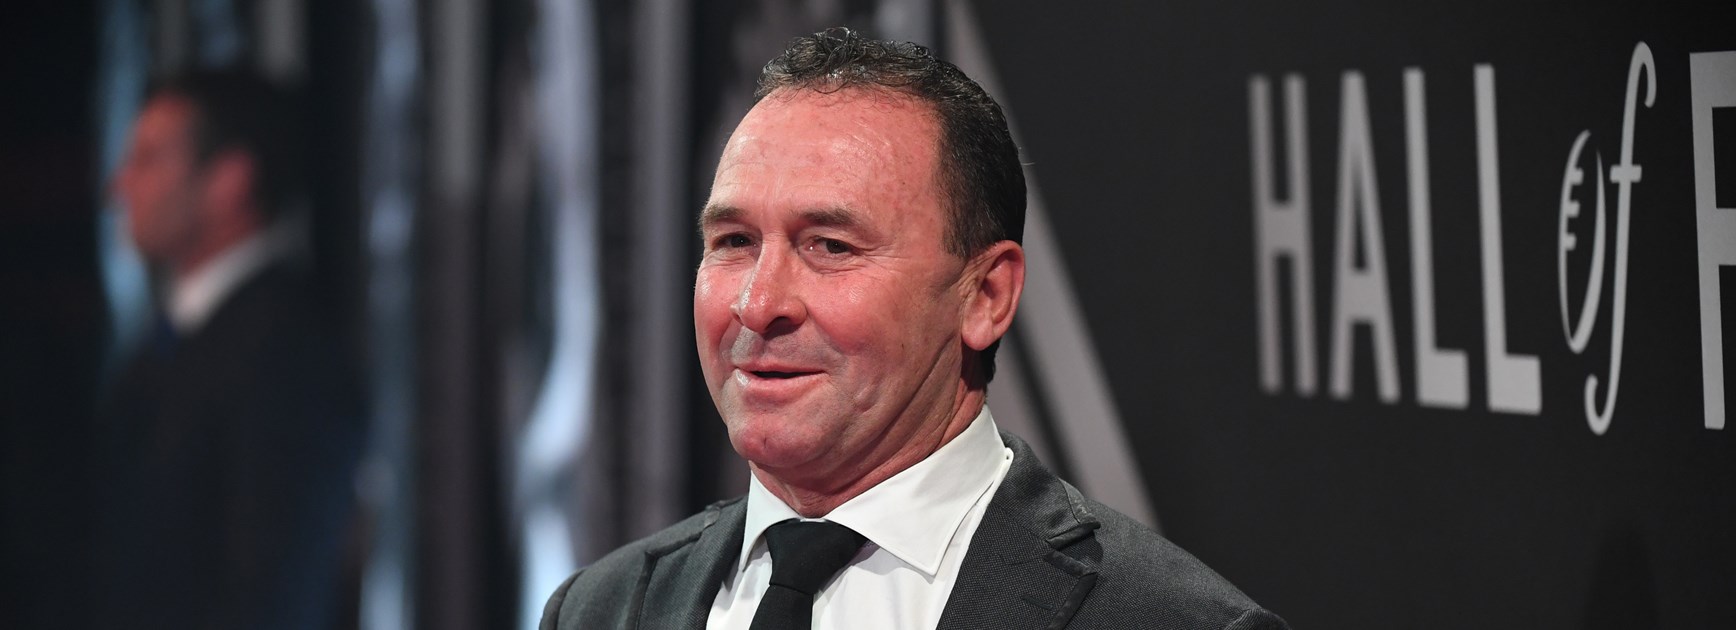 Ricky Stuart AM - Congratulations by Allan Hawke and the Raiders